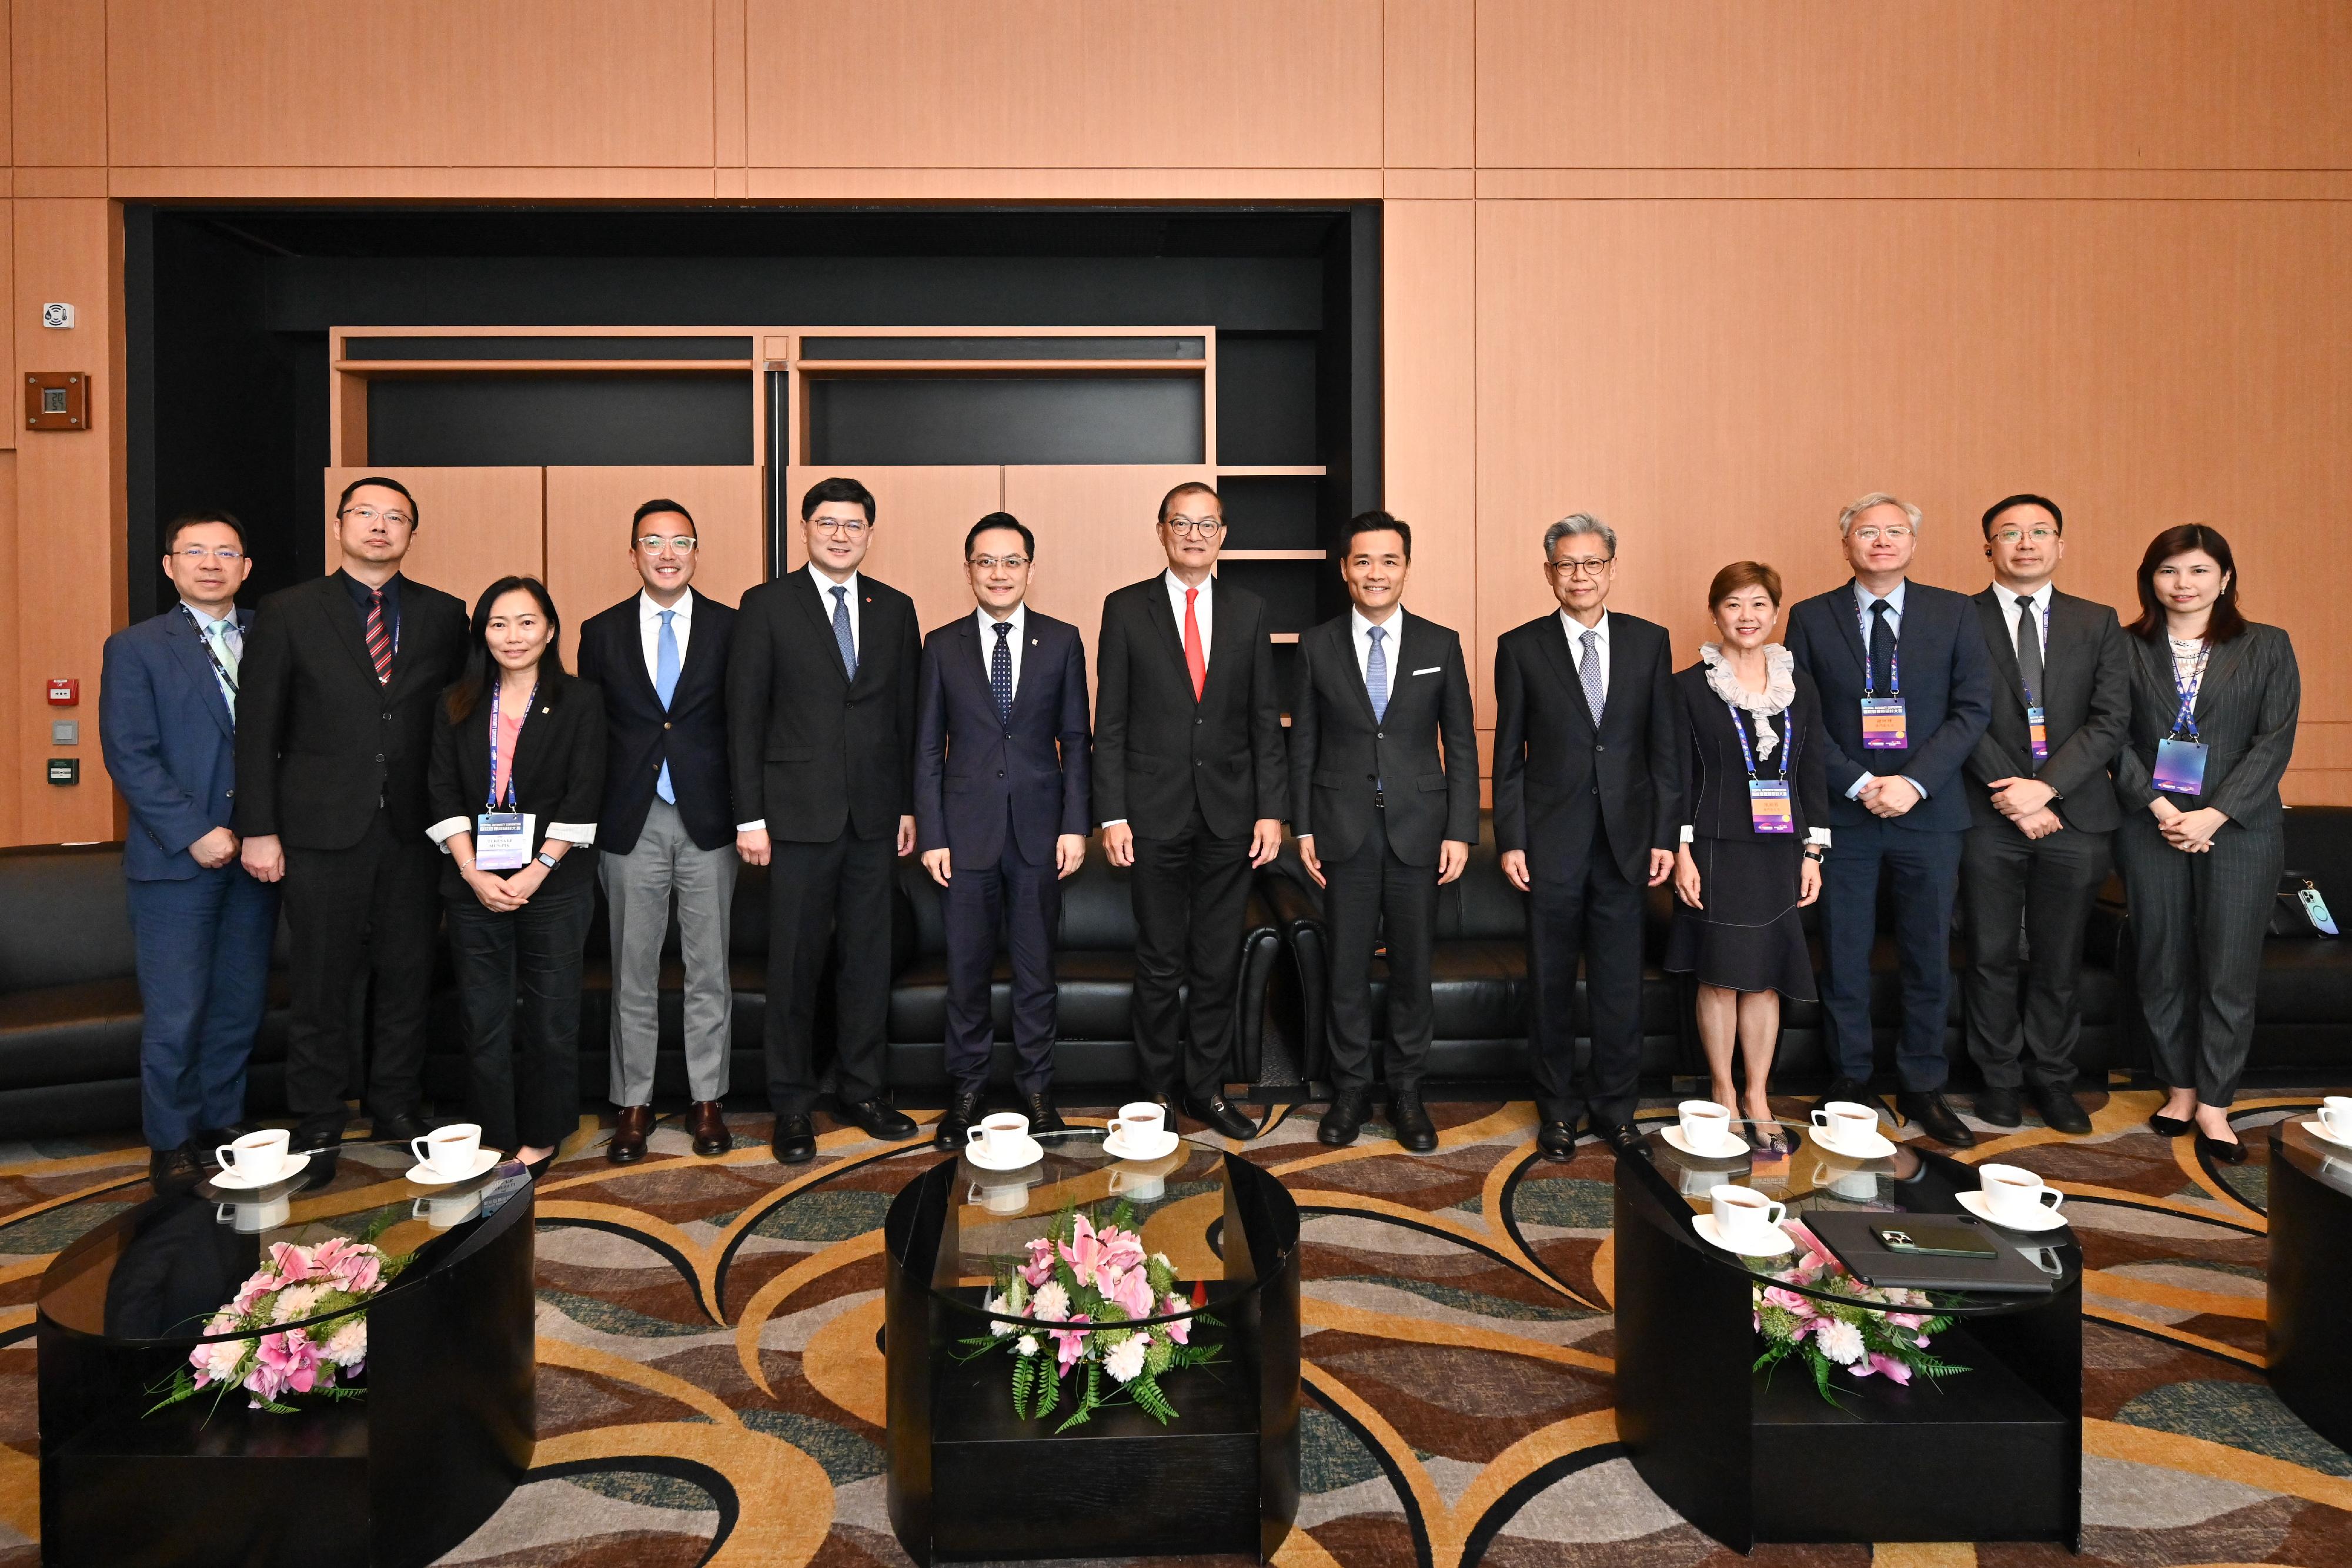 The Secretary for Health, Professor Lo Chung-mau, met with a delegation led by the Director of the Health Bureau of the Macao Special Administrative Region Government, Dr Lo Iek-long, today (May 16) to explore ways of strengthening co-operation in the area of healthcare. Photo shows Professor Lo (seventh left); Dr Lo Iek-long (sixth right); the Director of Health, Dr Ronald Lam (sixth left); the Chief Executive of the Hospital Authority, Dr Tony Ko (fifth left), with other attendees of the meeting.